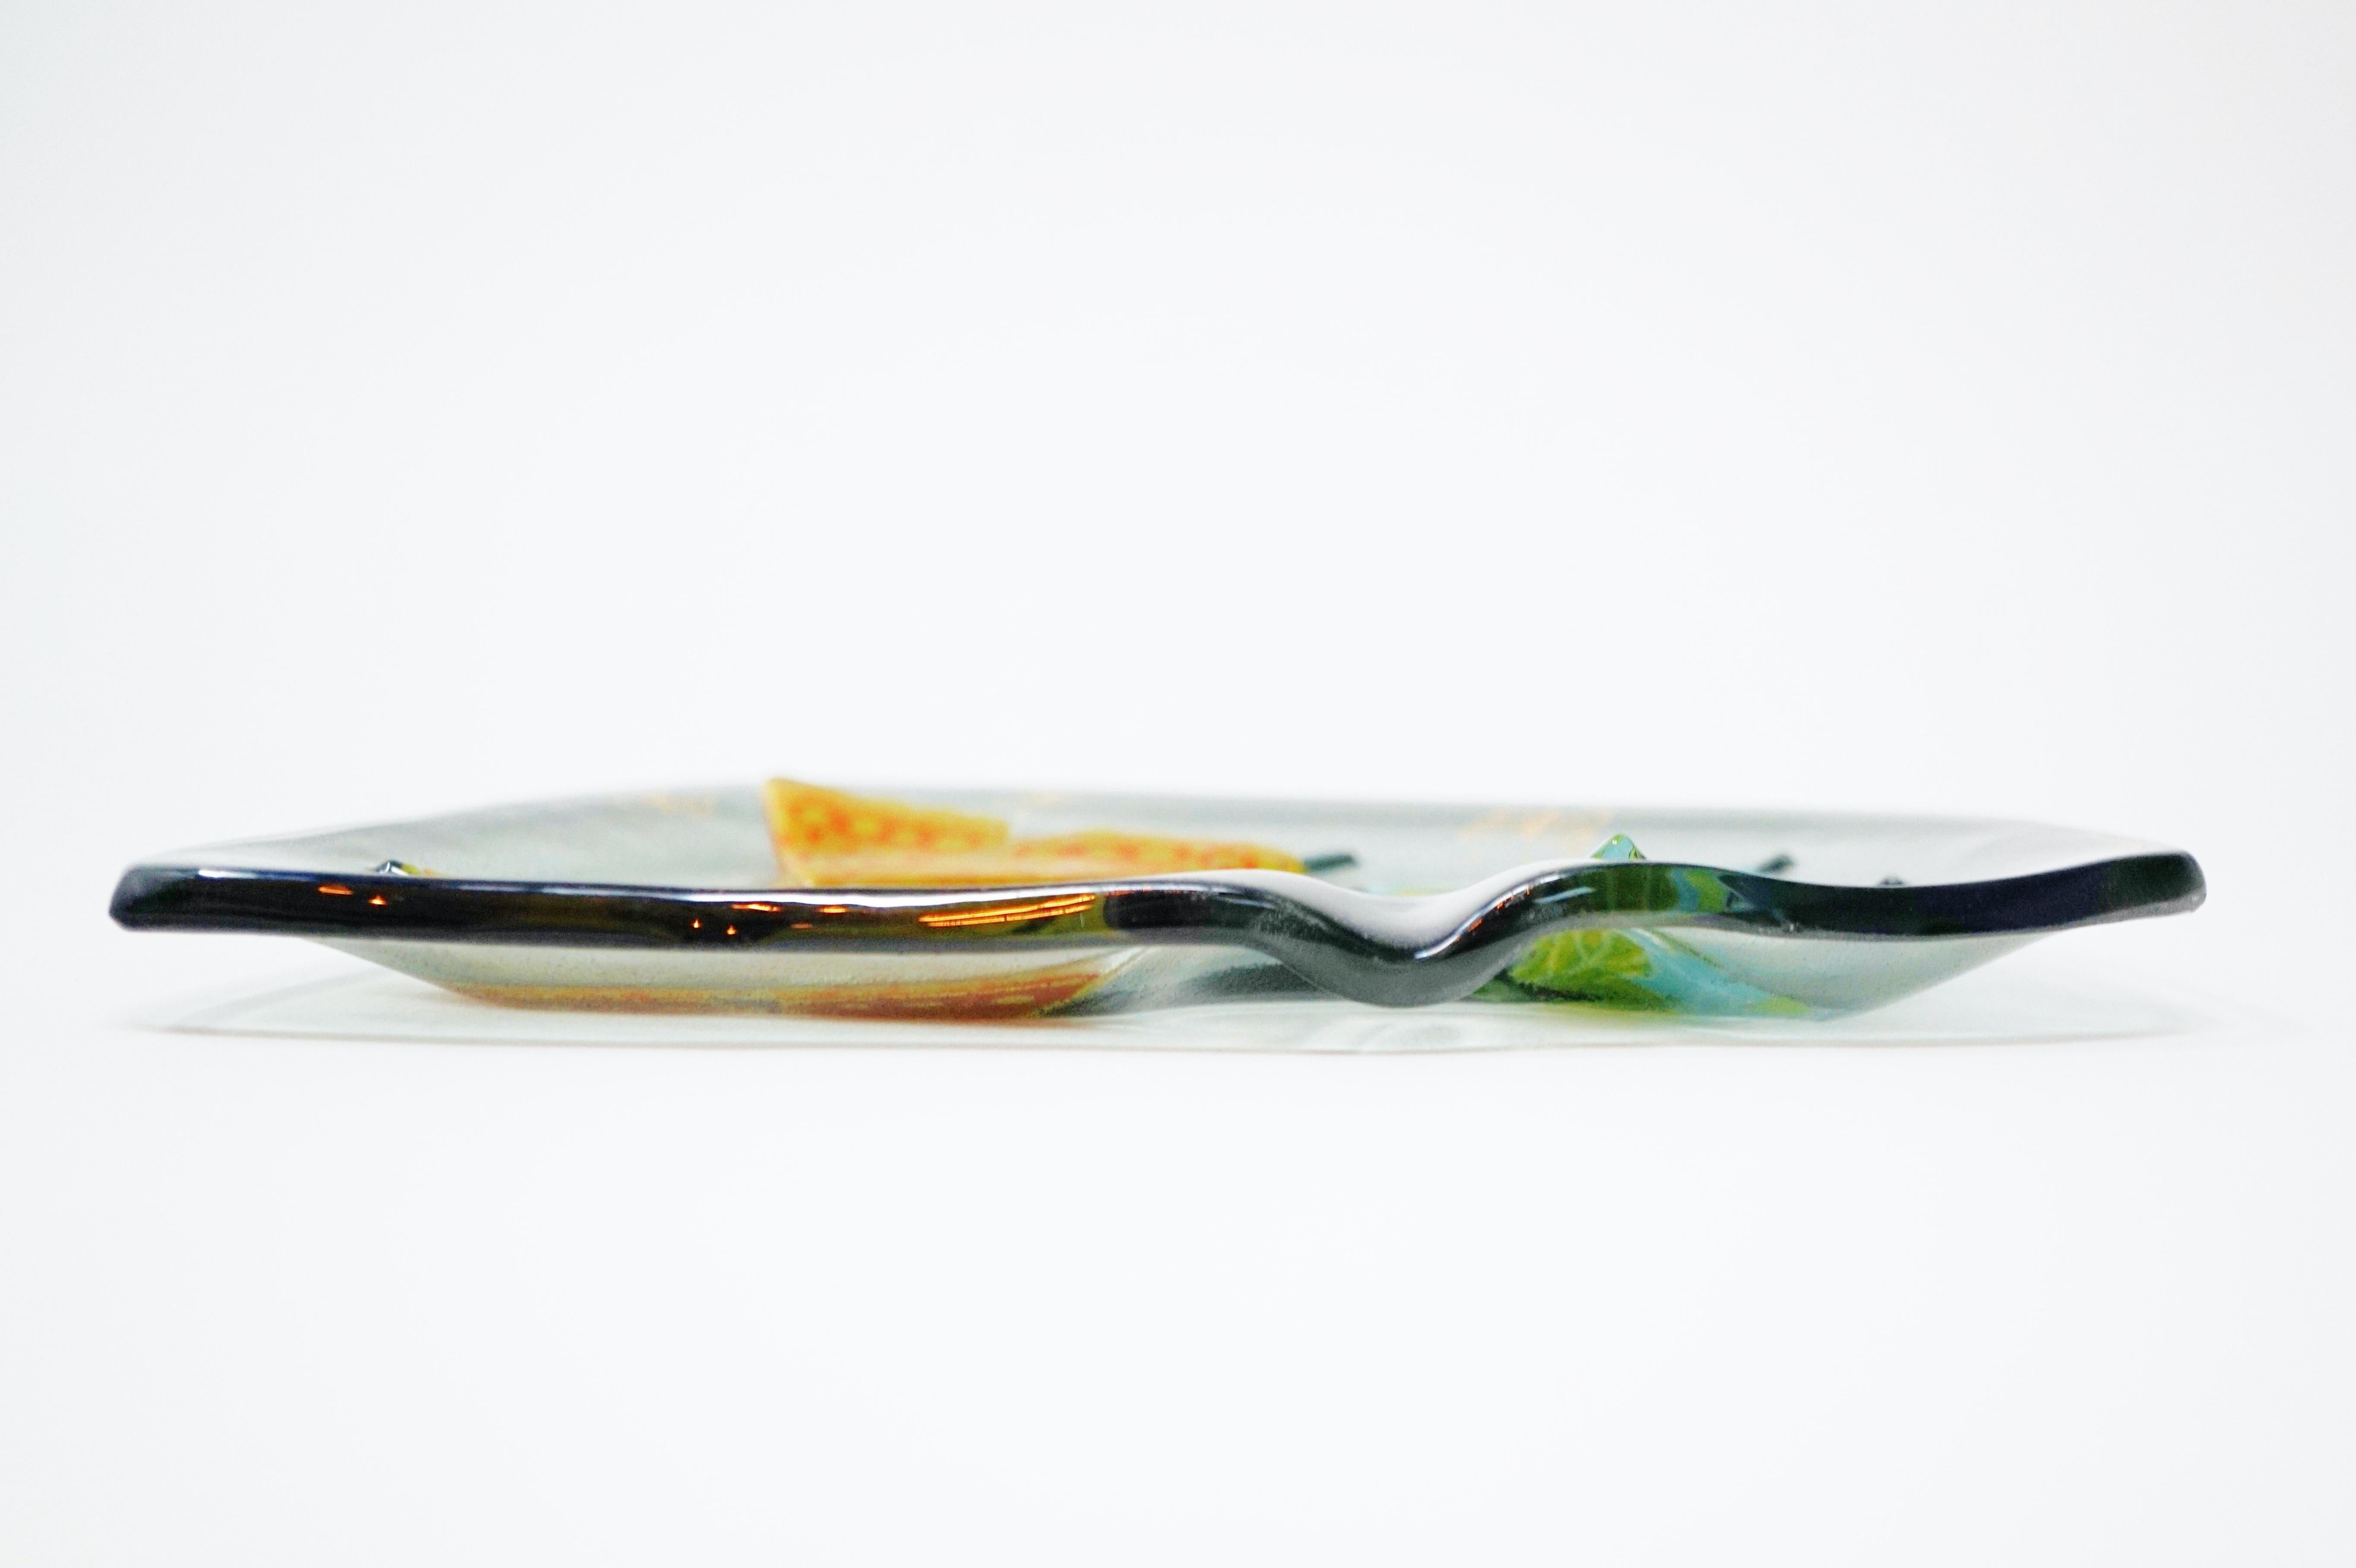 American Butterfly Themed Fused Art Glass Ashtray by Higgins, Signed, circa 1950s